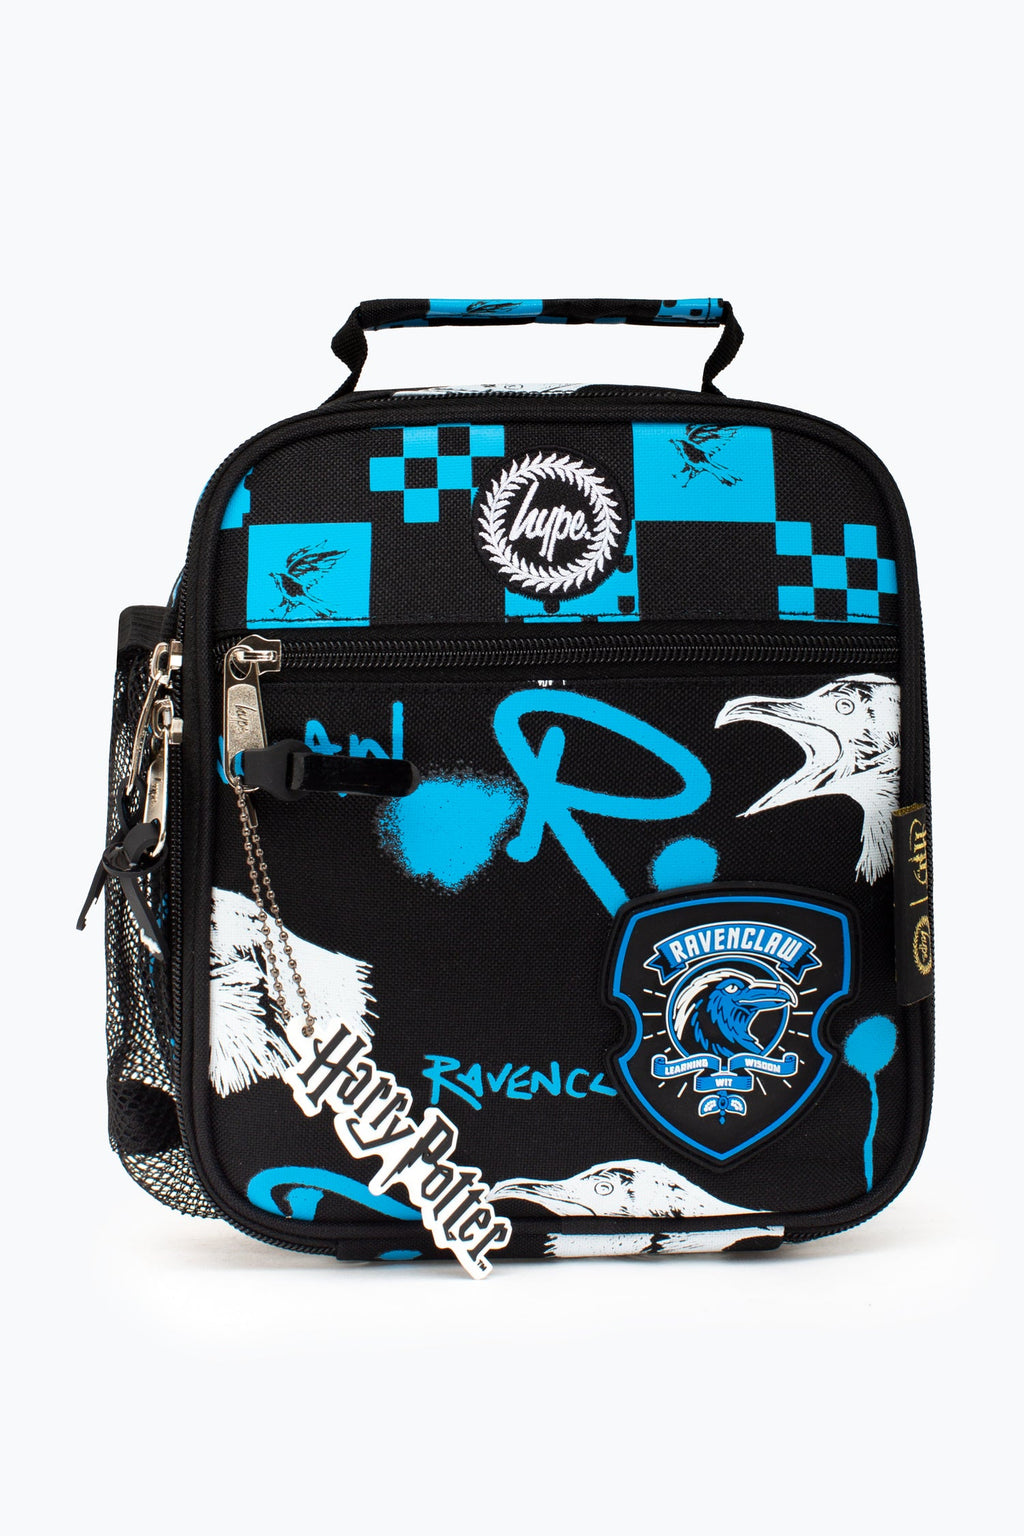 Harry Potter X Hype. Ravenclaw Lunch Box